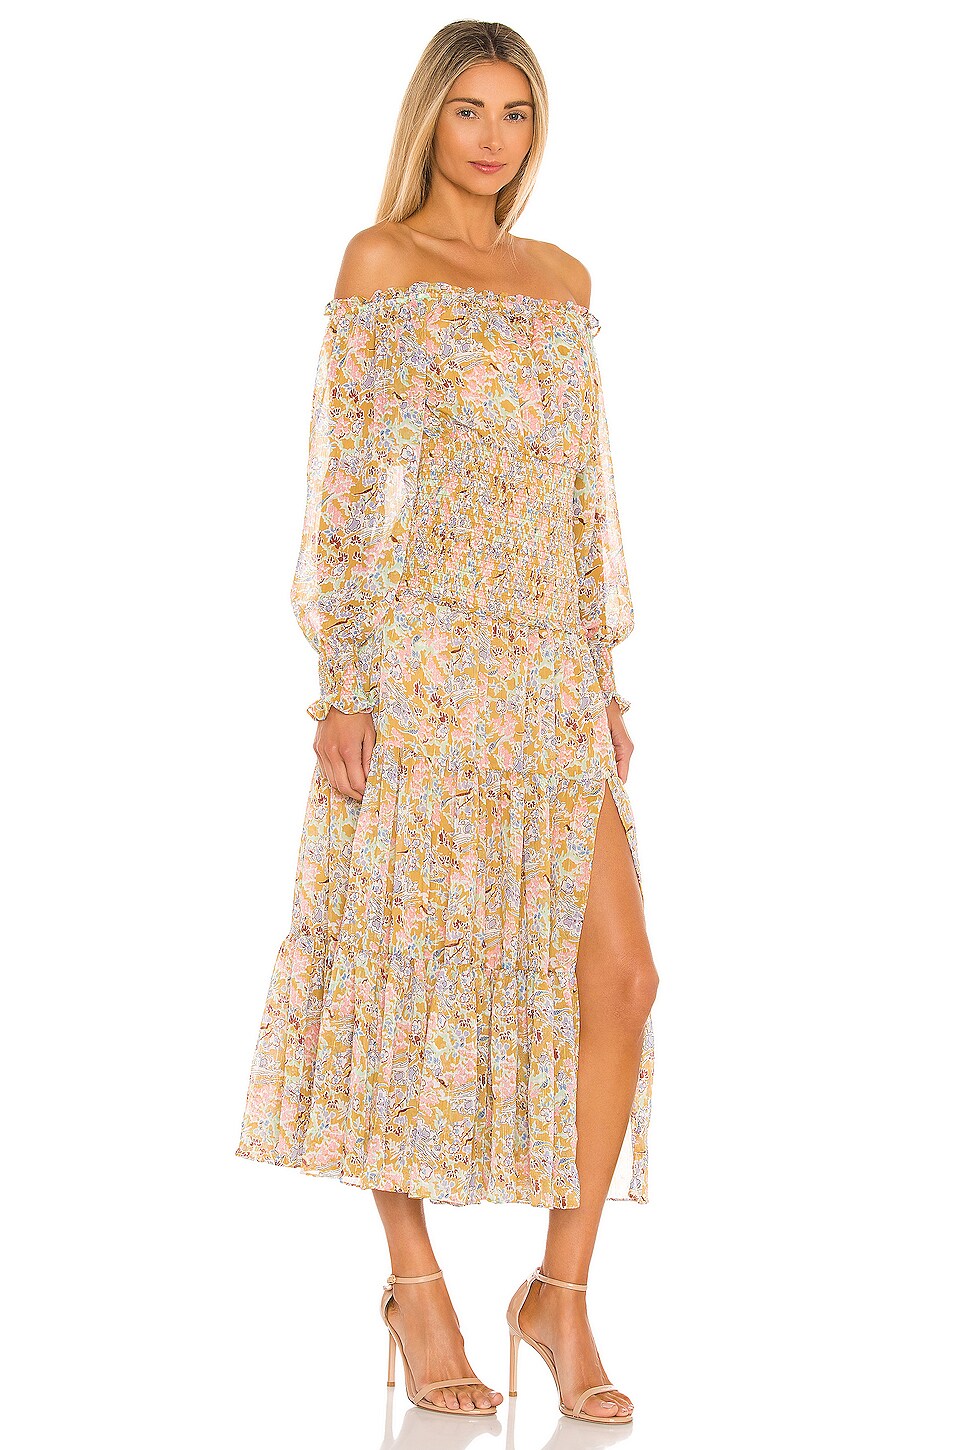 LIKELY Indica Dress in Mustard Gold Multi | REVOLVE